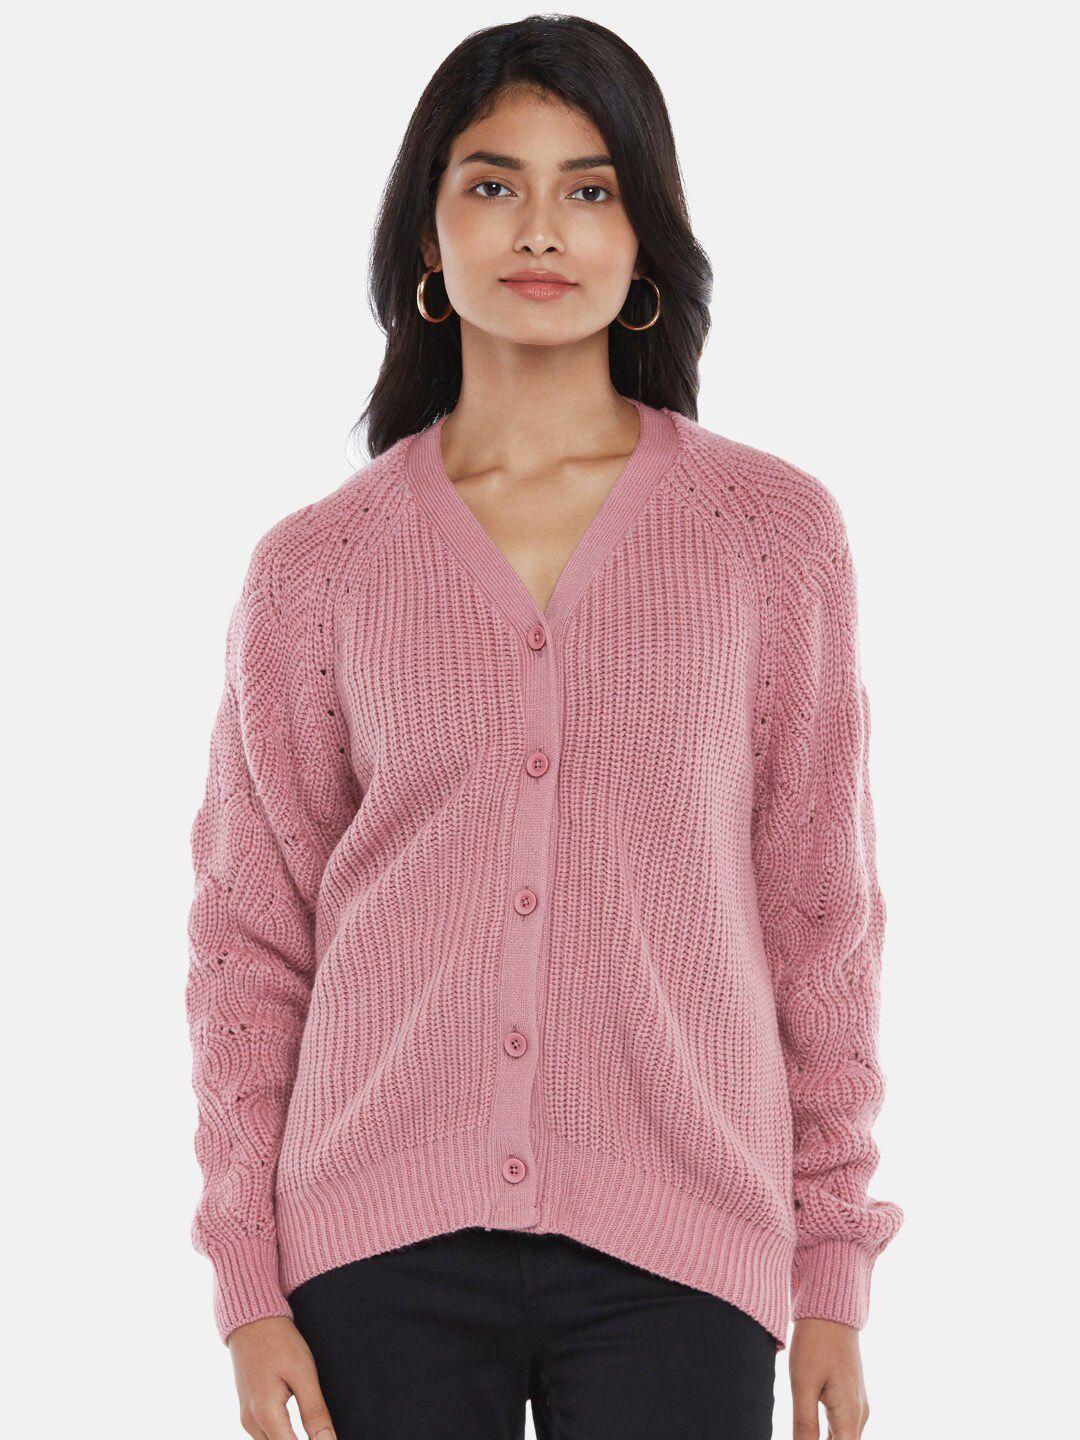 honey by pantaloons women pink pullover